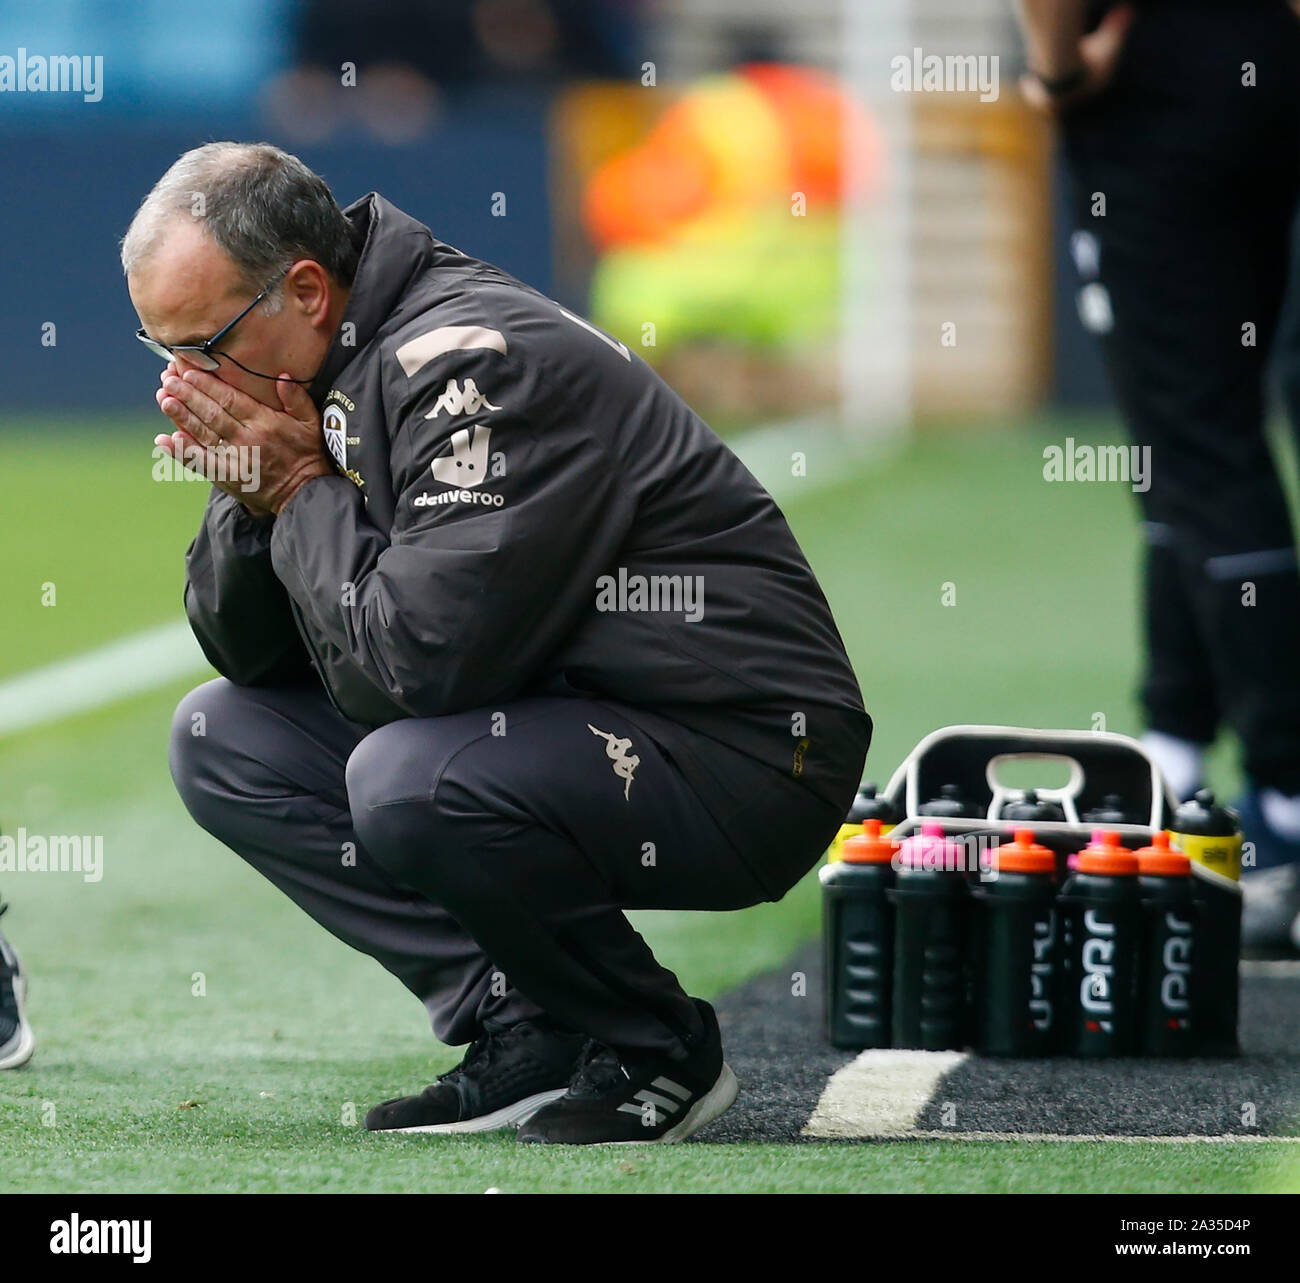 London, UK. 5th Oct, 2019. Leeds United manager Marcelo Bielsa during English Sky Bet Championship between Millwall and Leeds United at The Den, London, England on 05 October 2019 Credit: Action Foto Sport/Alamy Live News Stock Photo